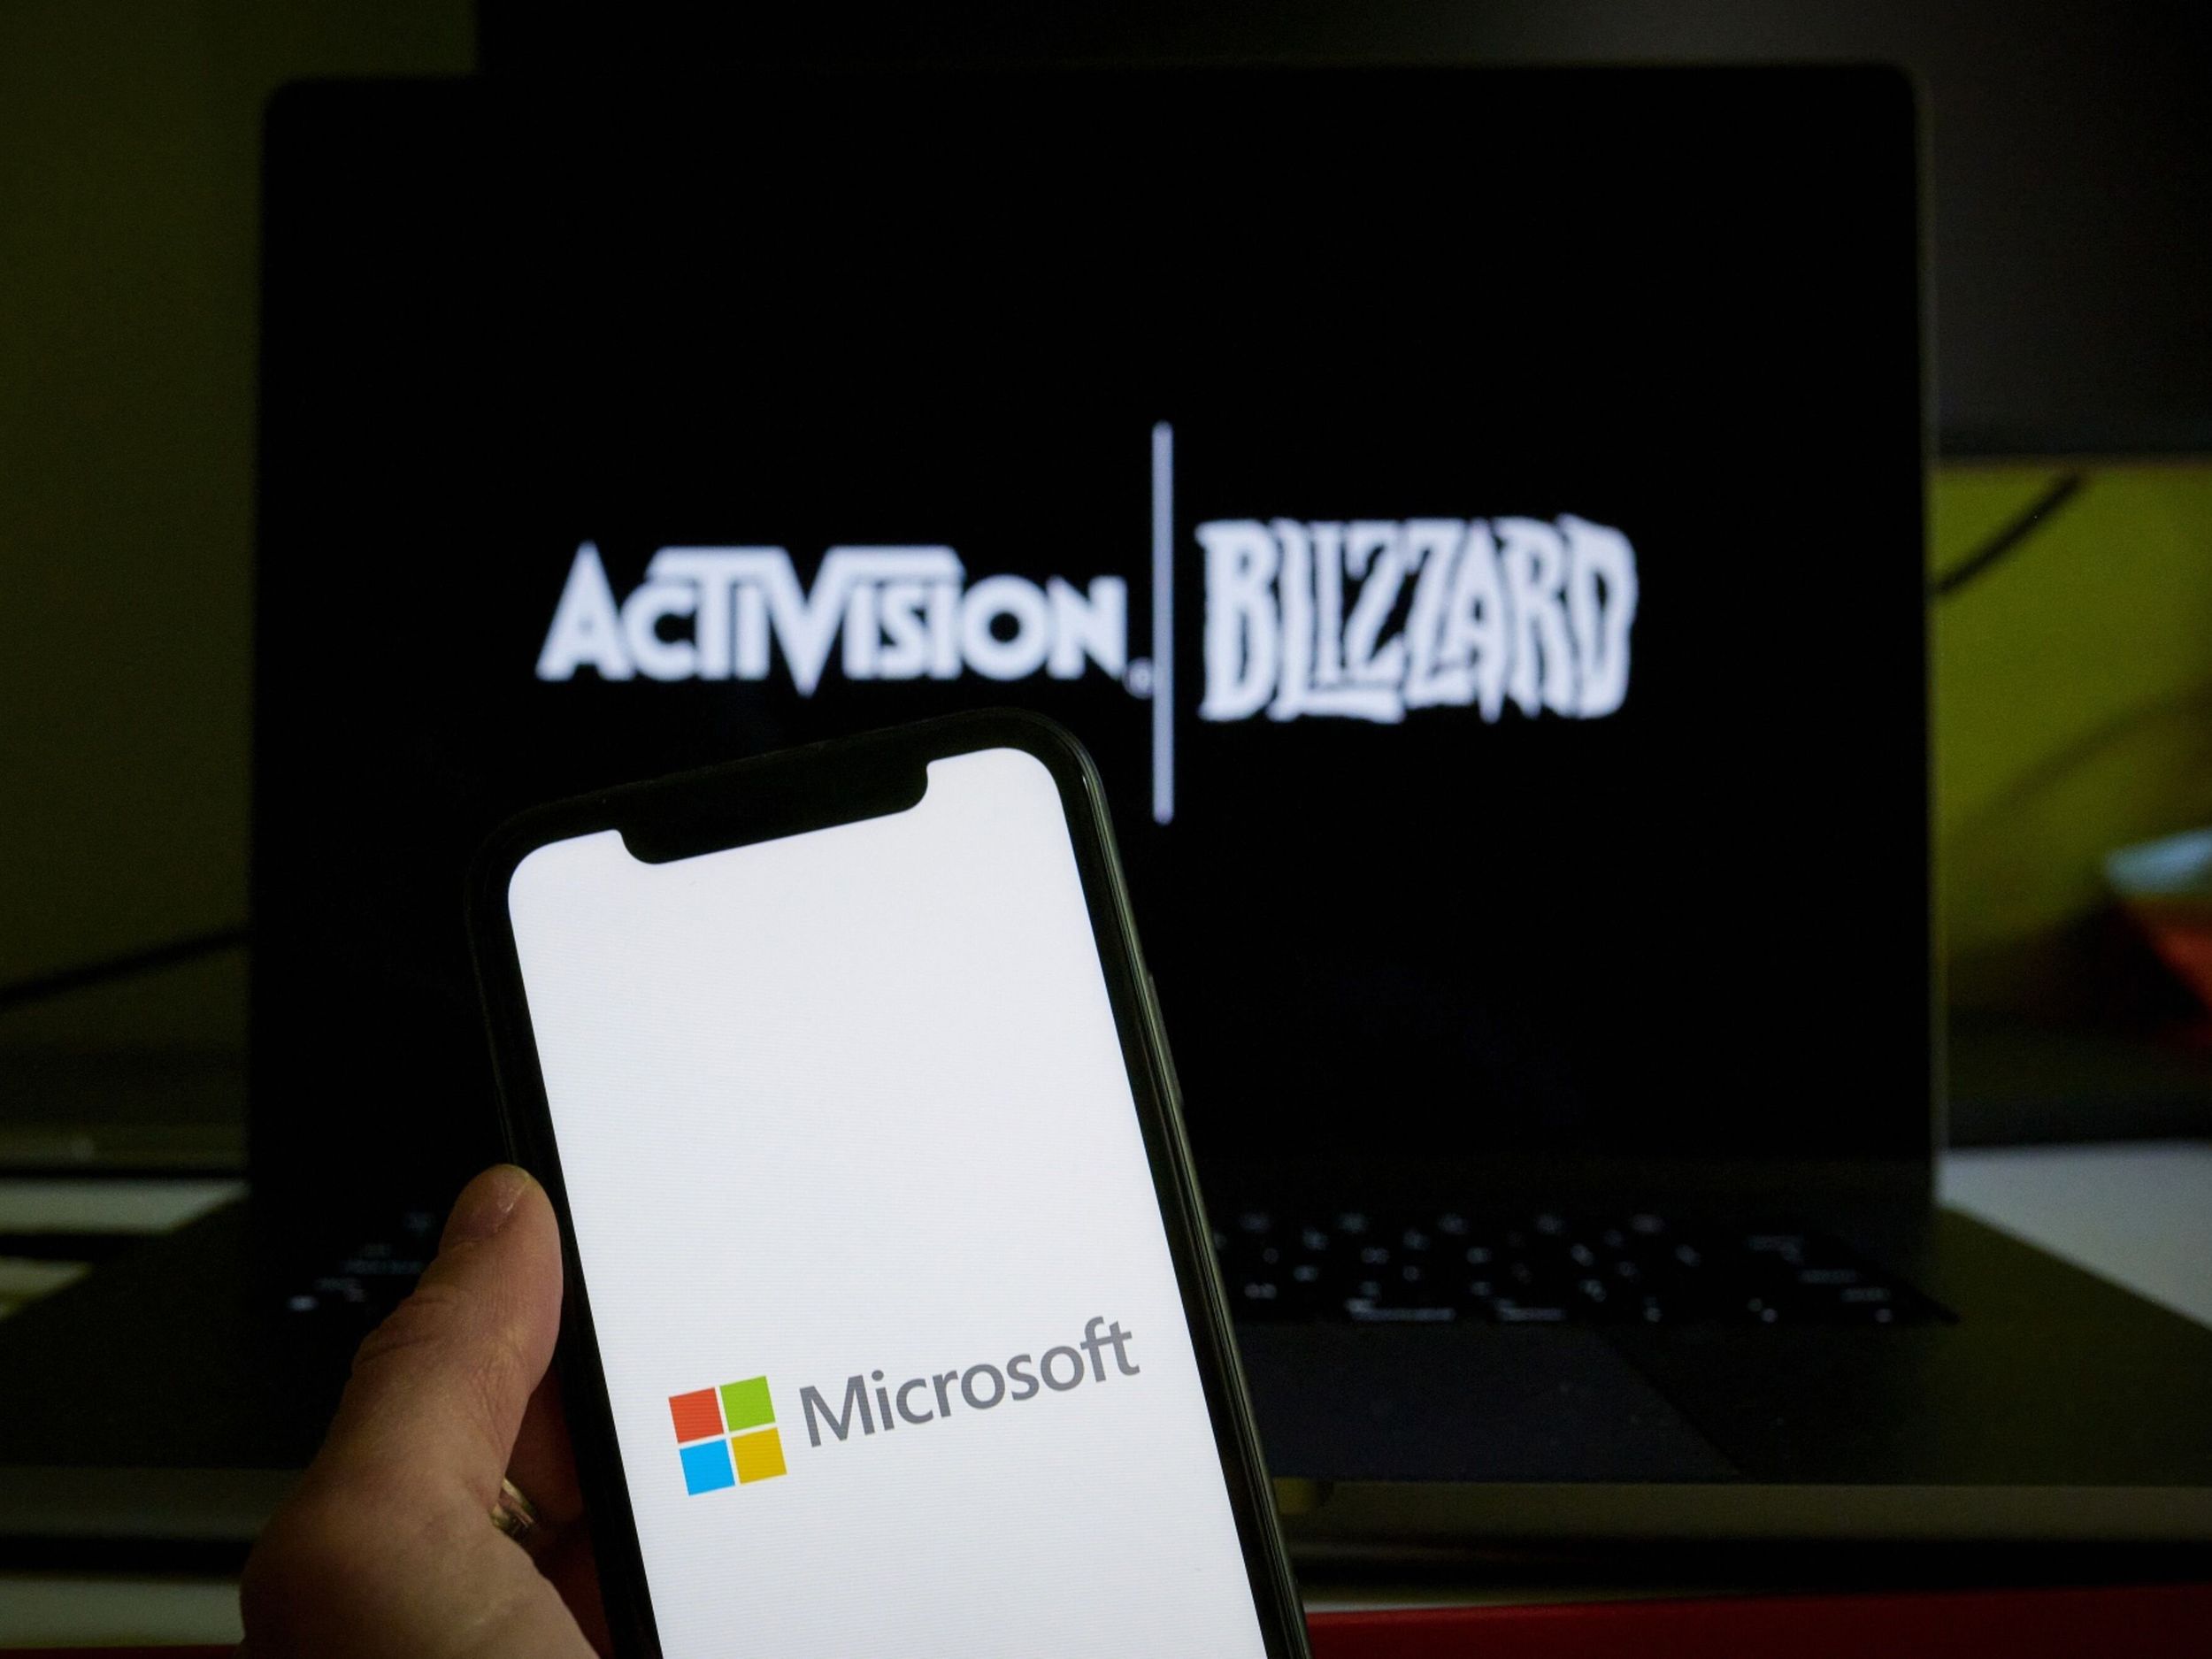 Microsoft to Bring Call of Duty to Nintendo If FTC OKs Activision Deal